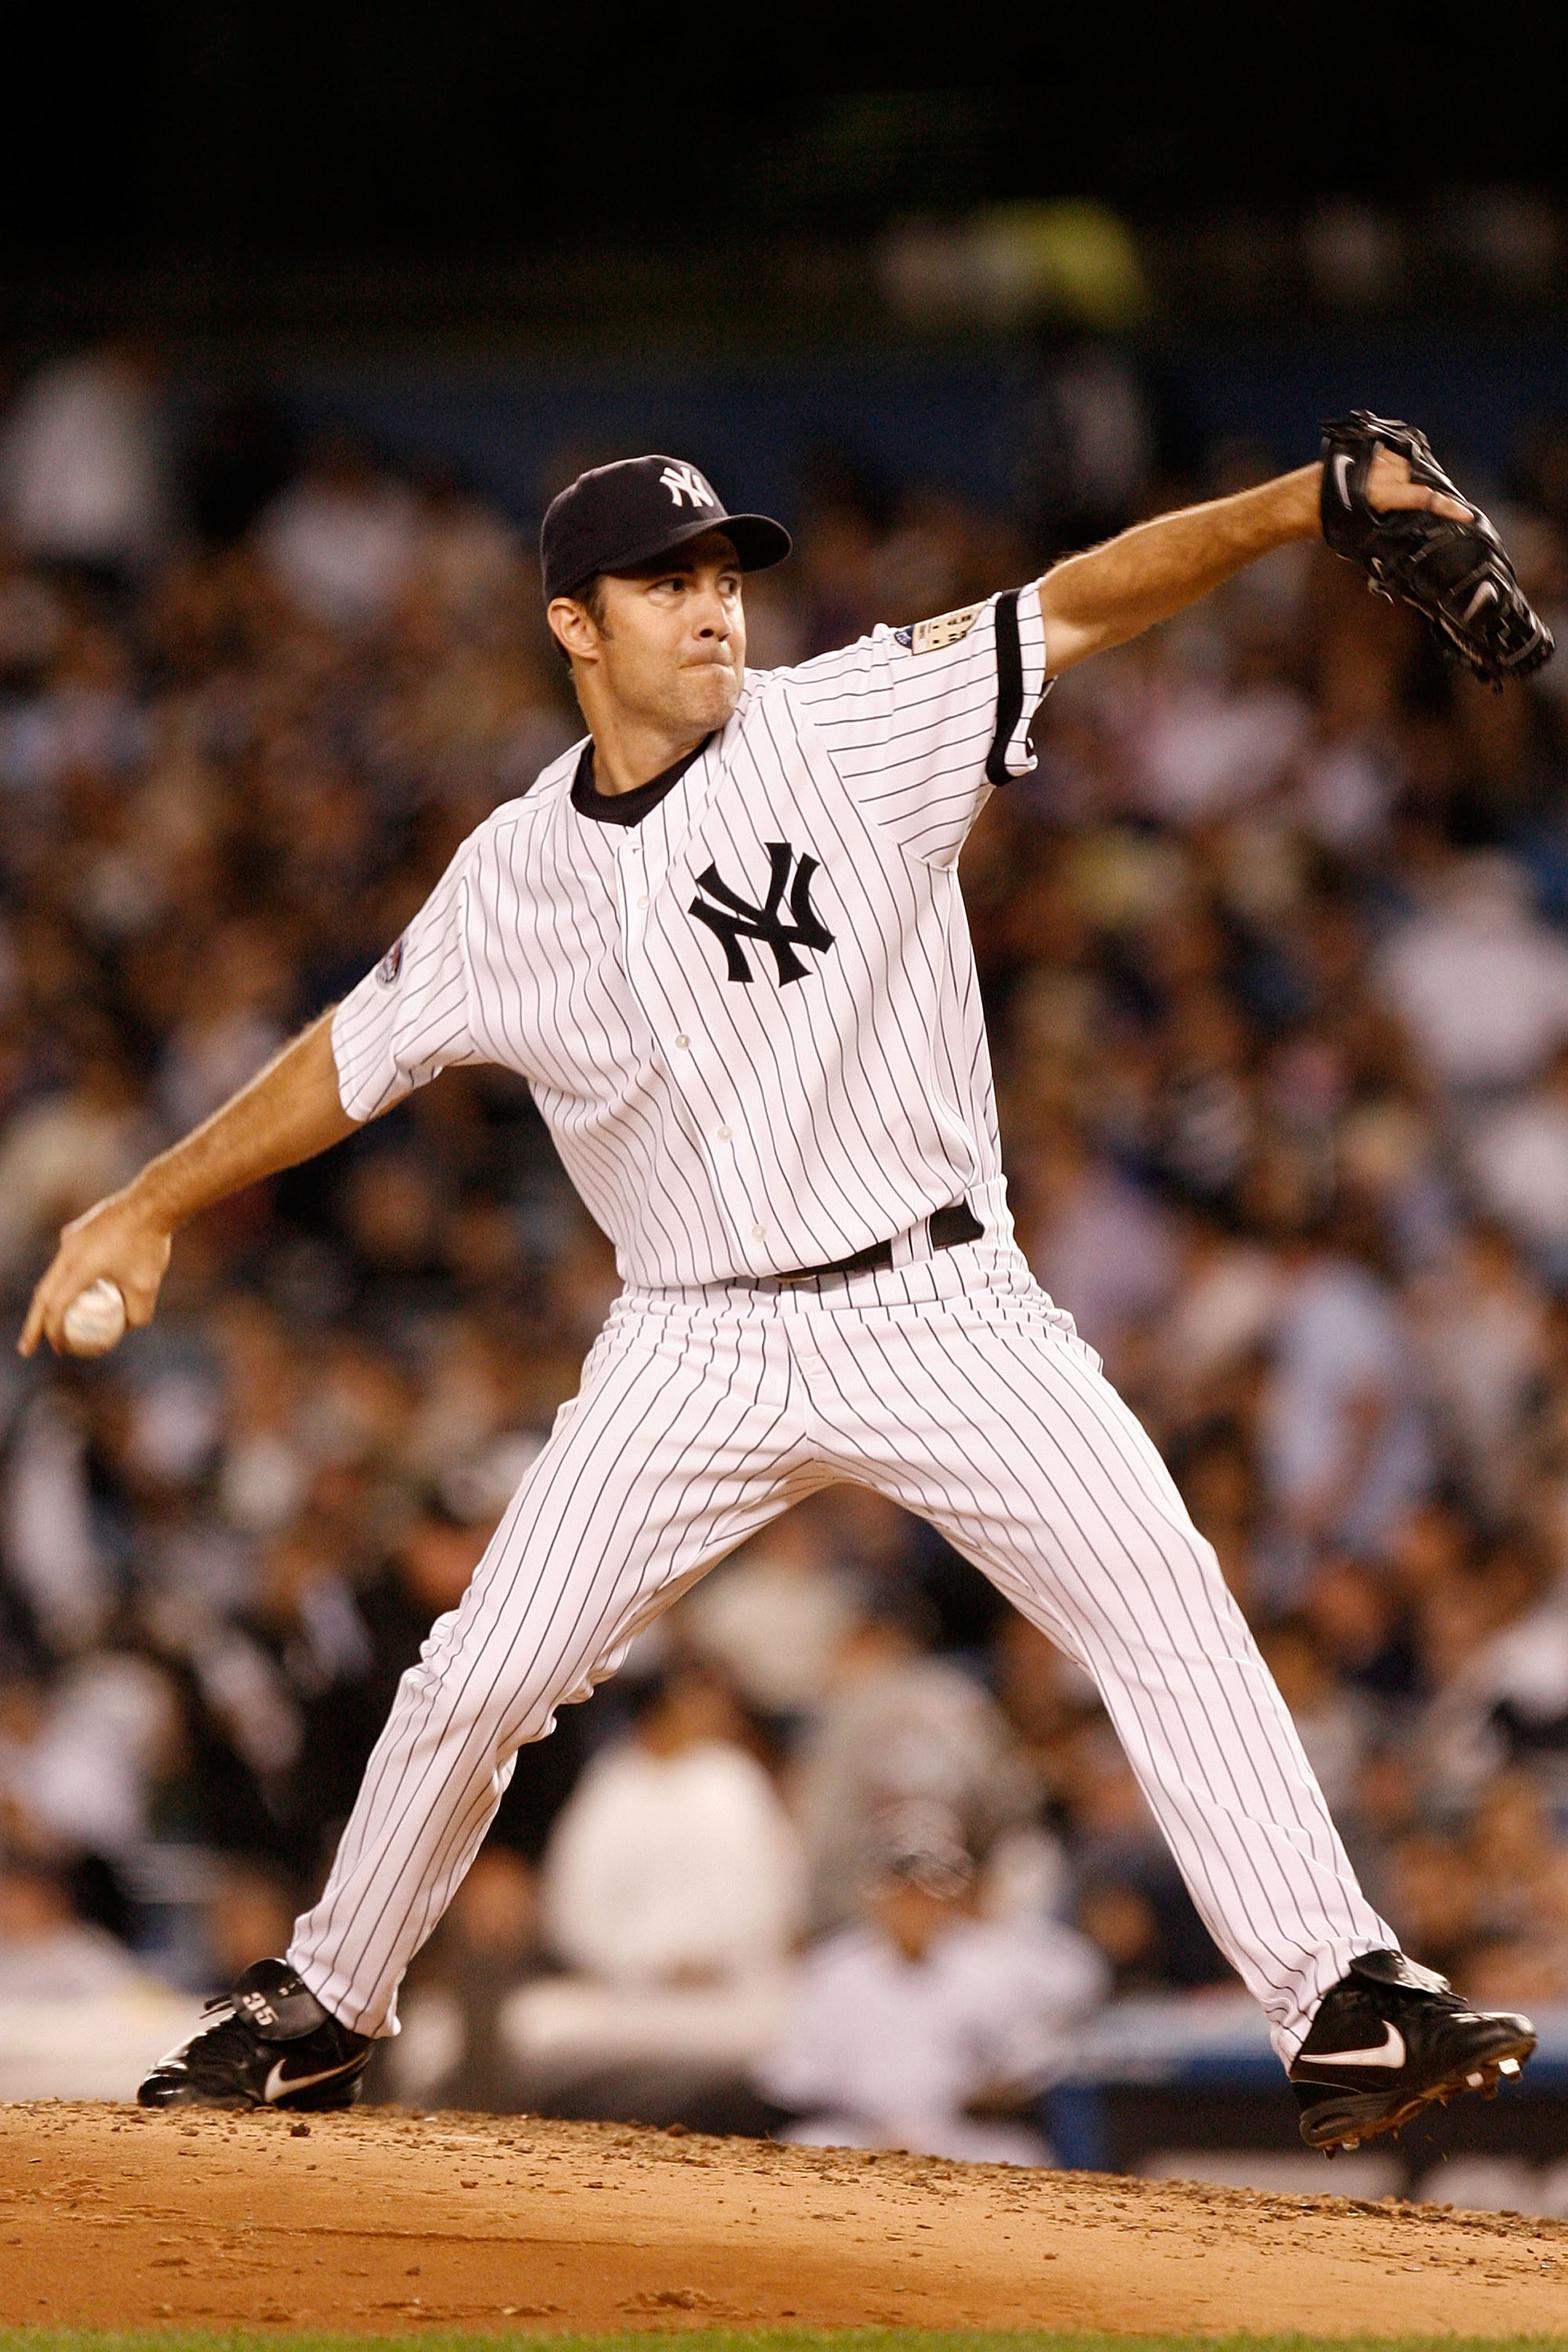 The New York Yankees' Top 10 Pitchers of the Last 20 Years